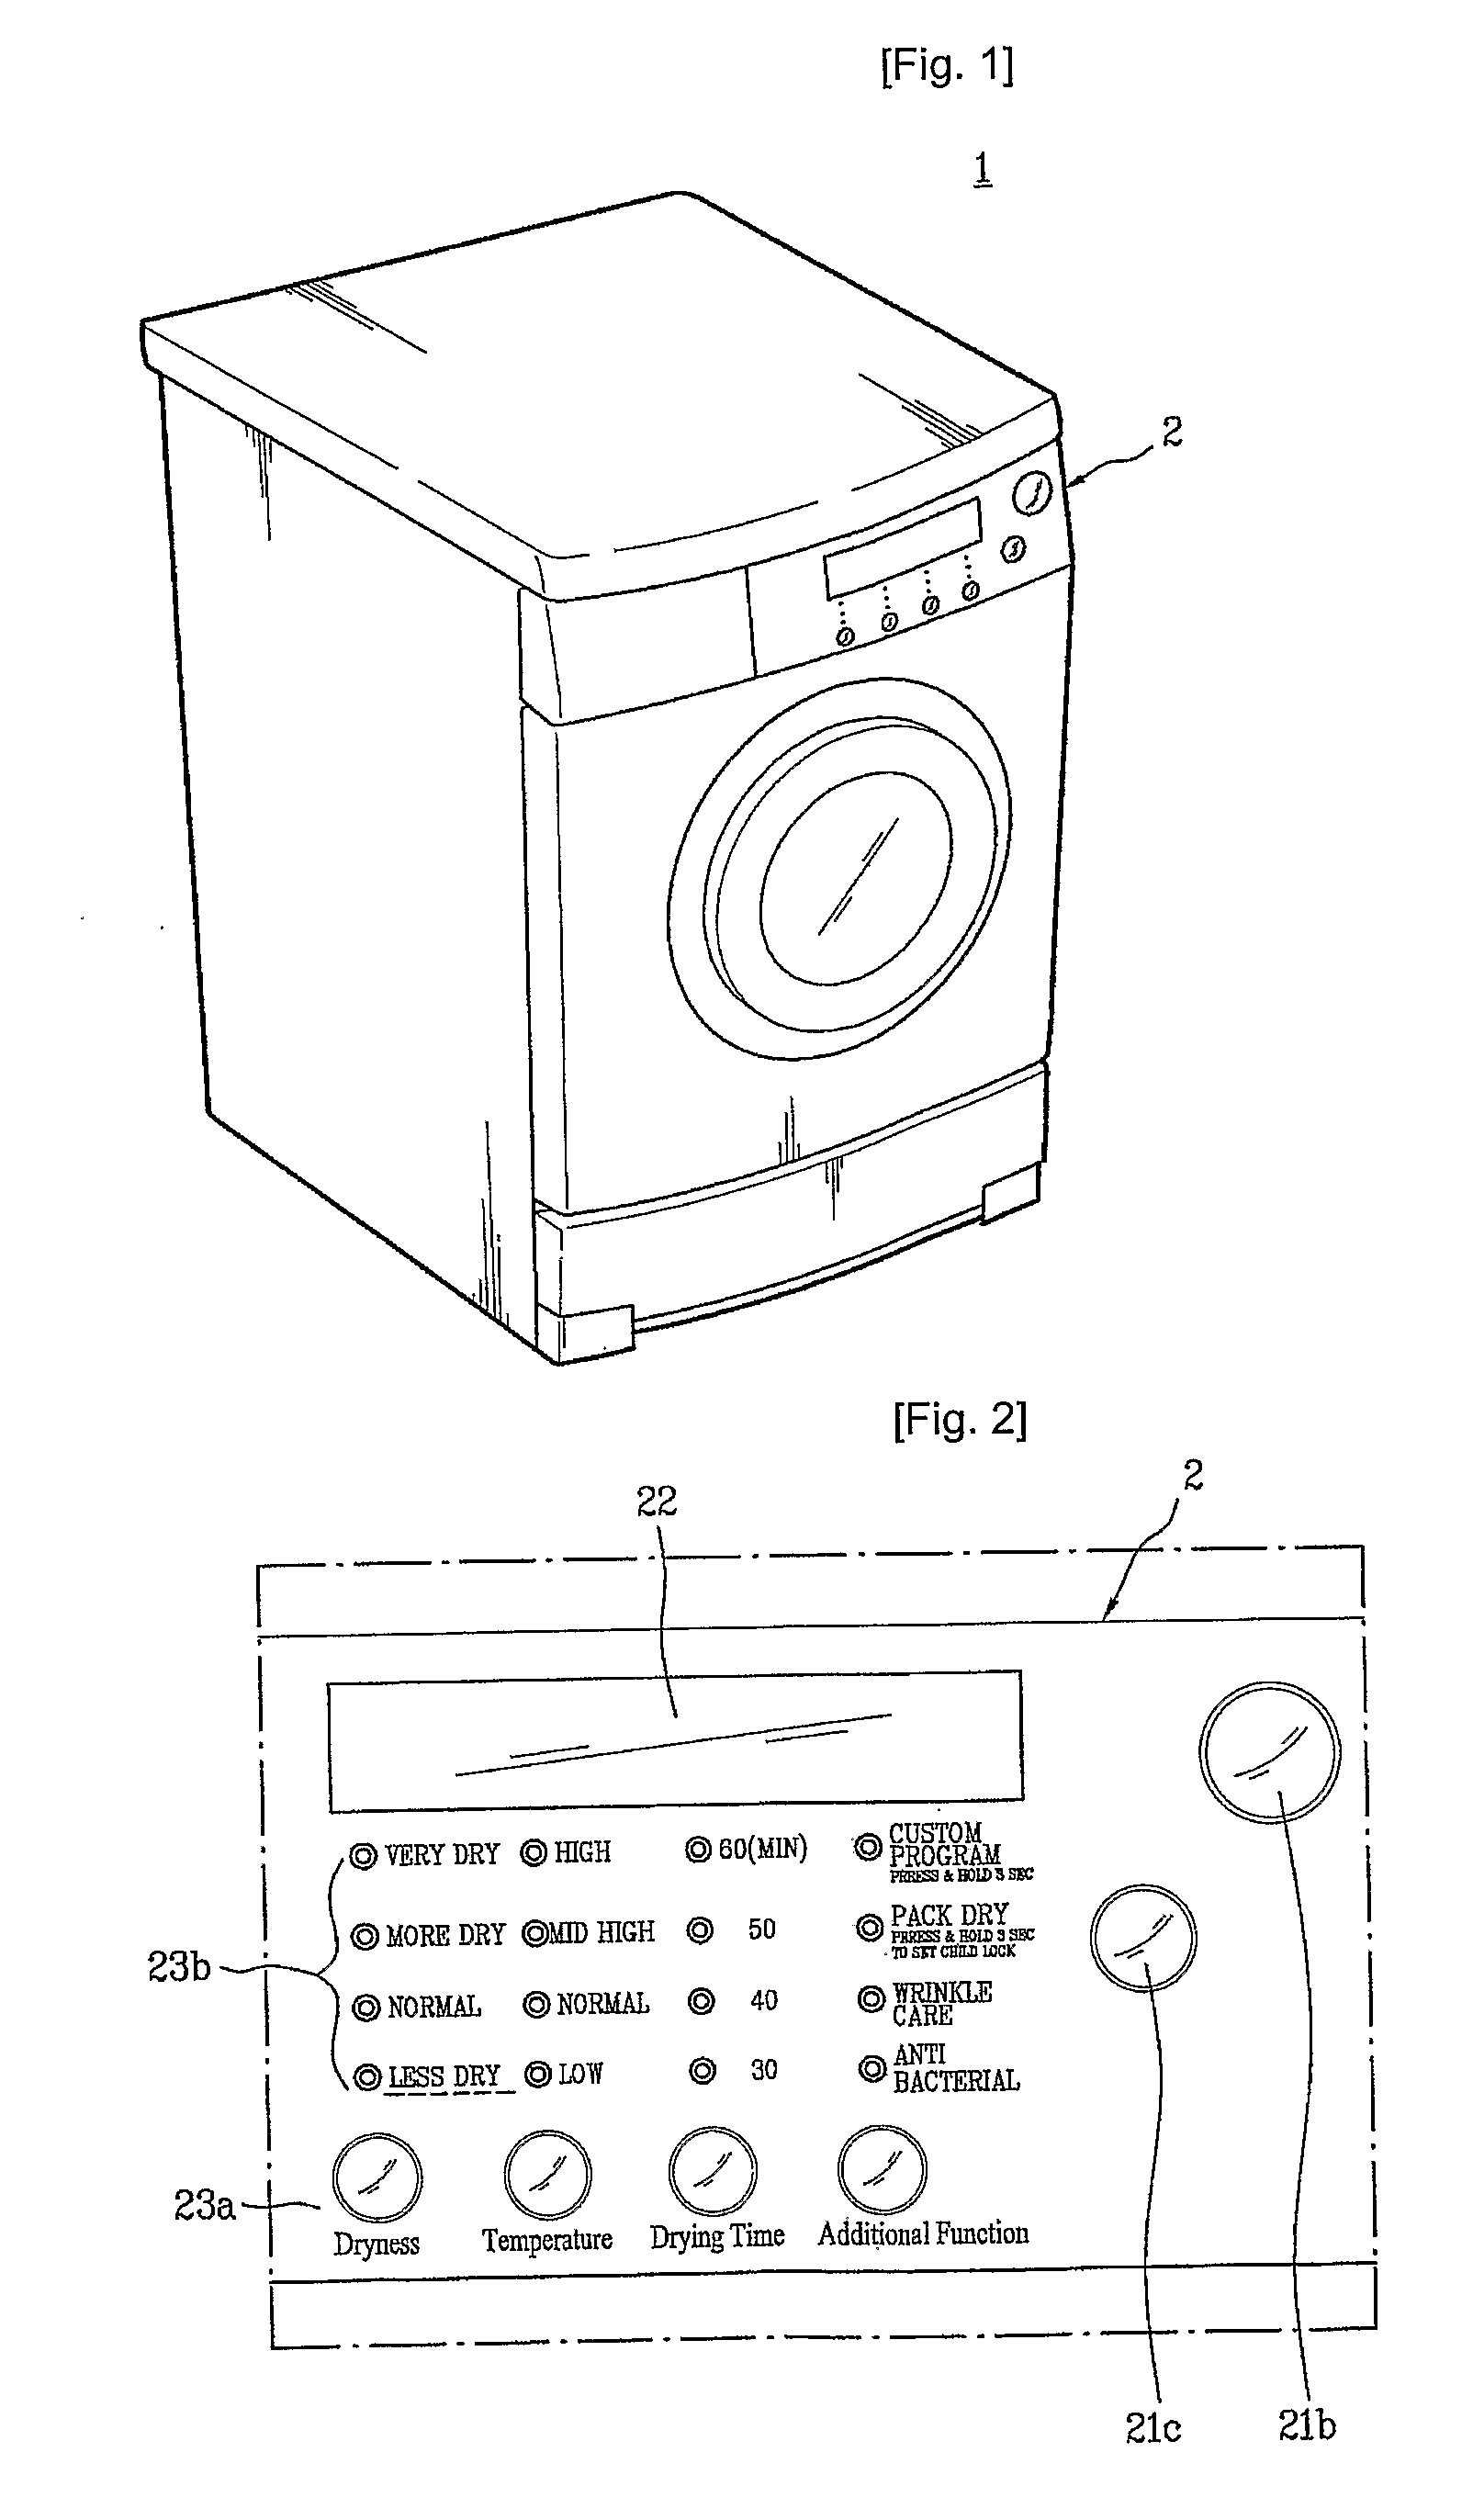 Control panel assembly for laundry device